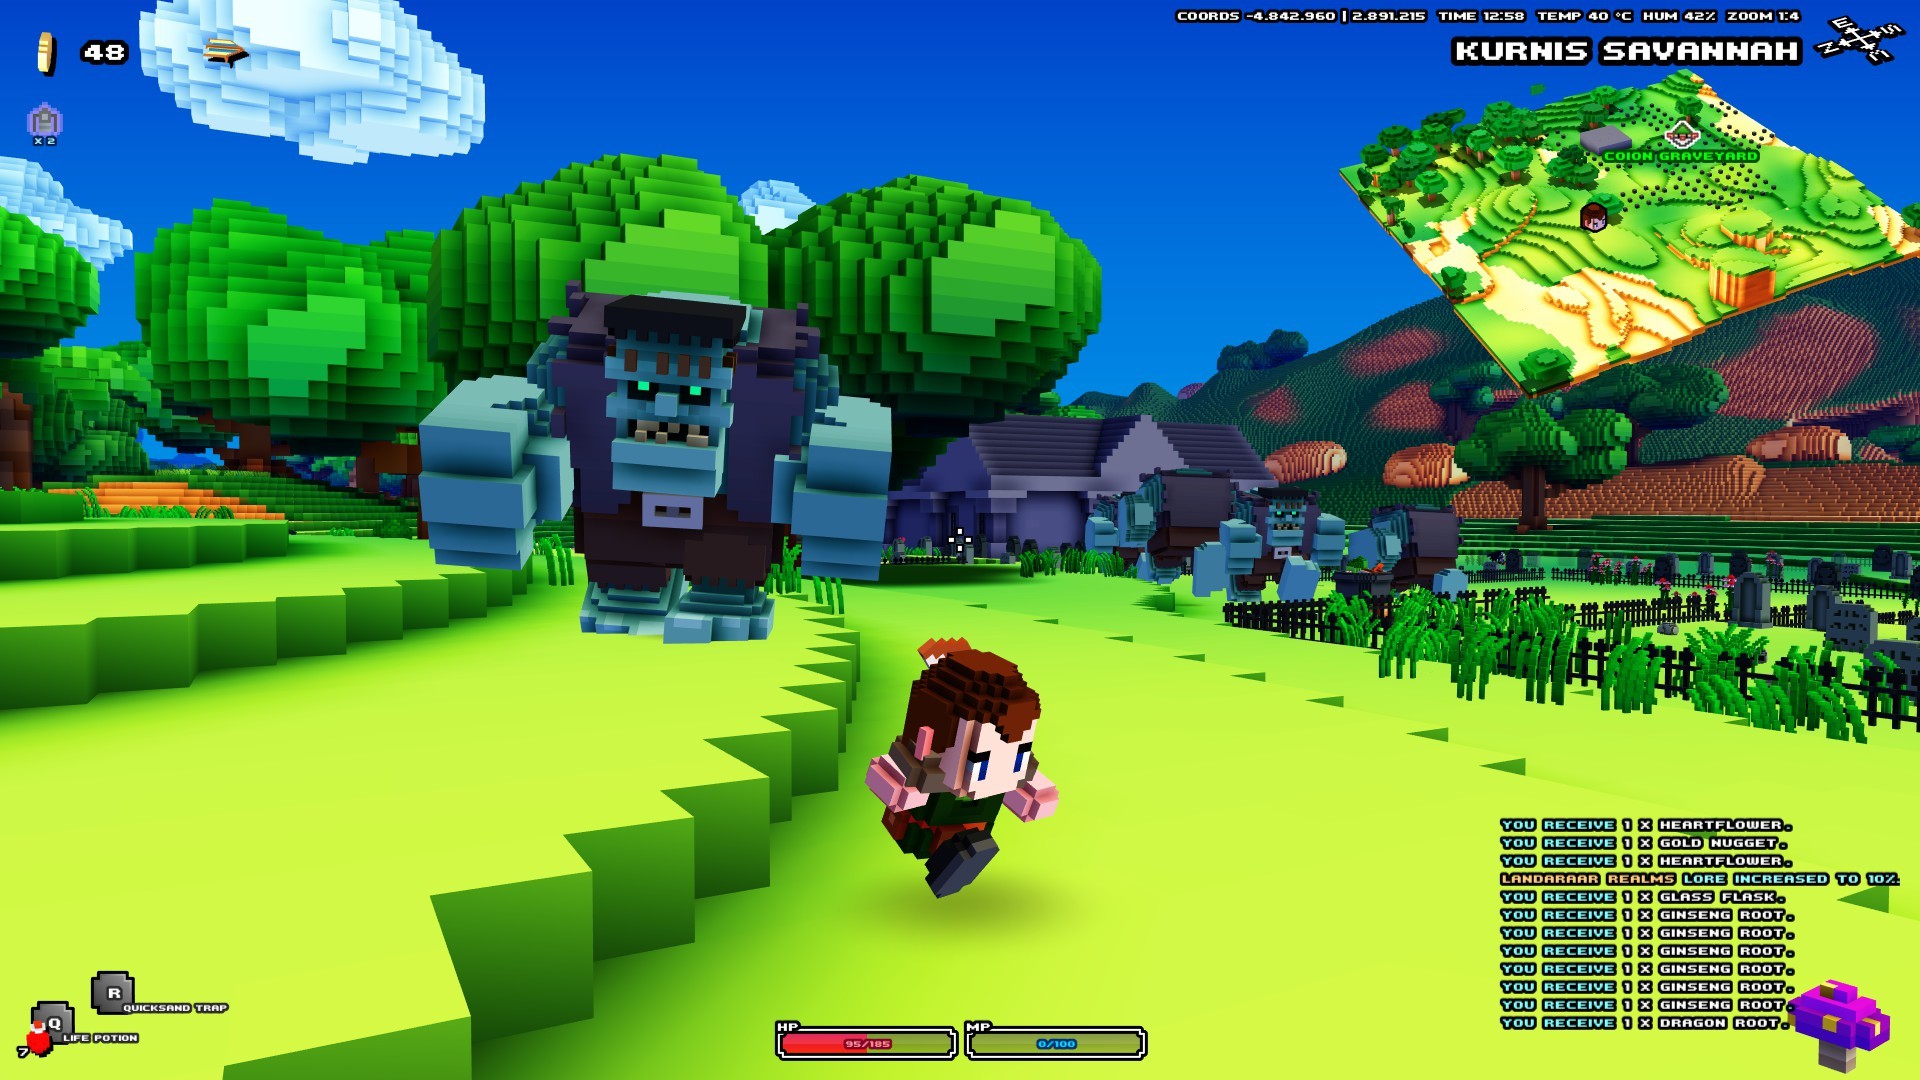 Cube World Free Download